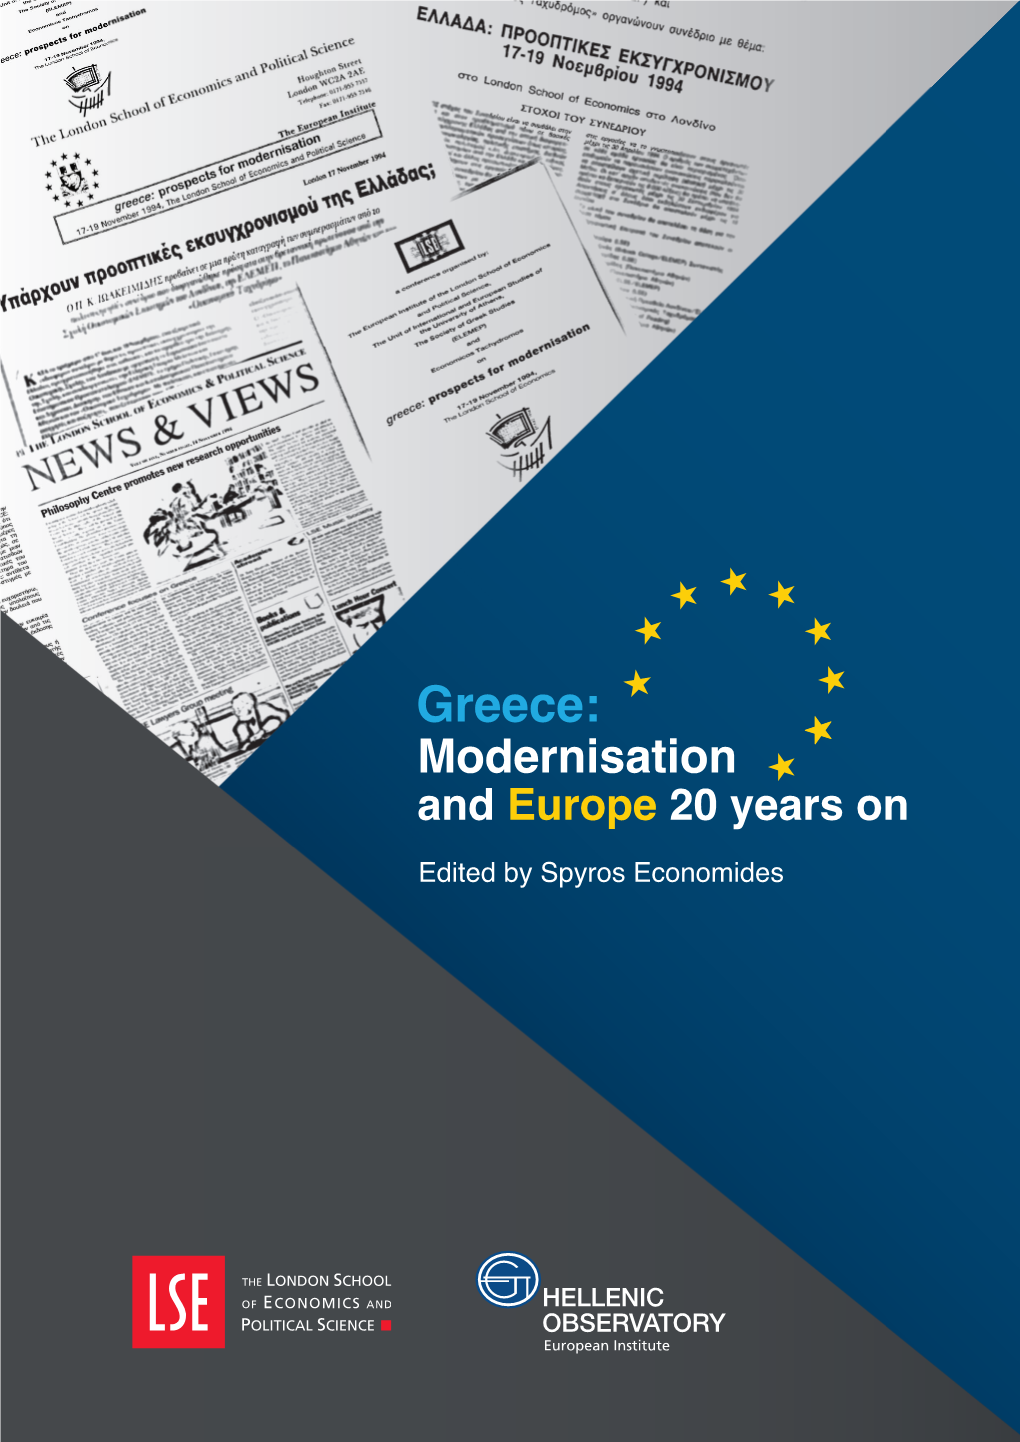 Greece Modernisation and Europe Publication